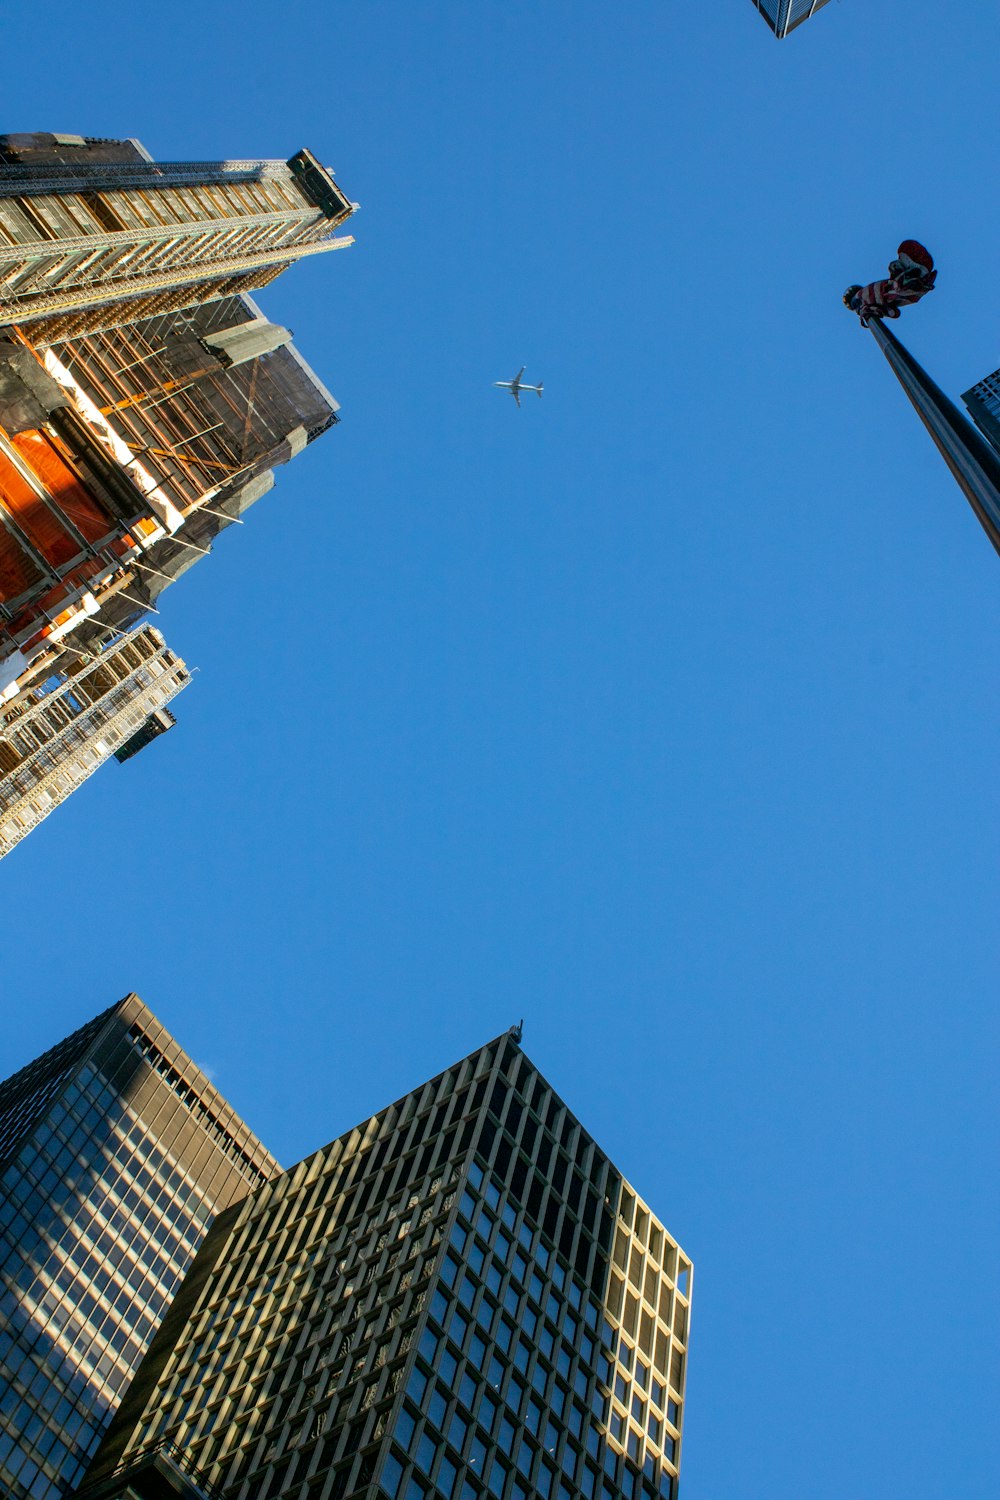 a plane flying in the sky between two tall buildings